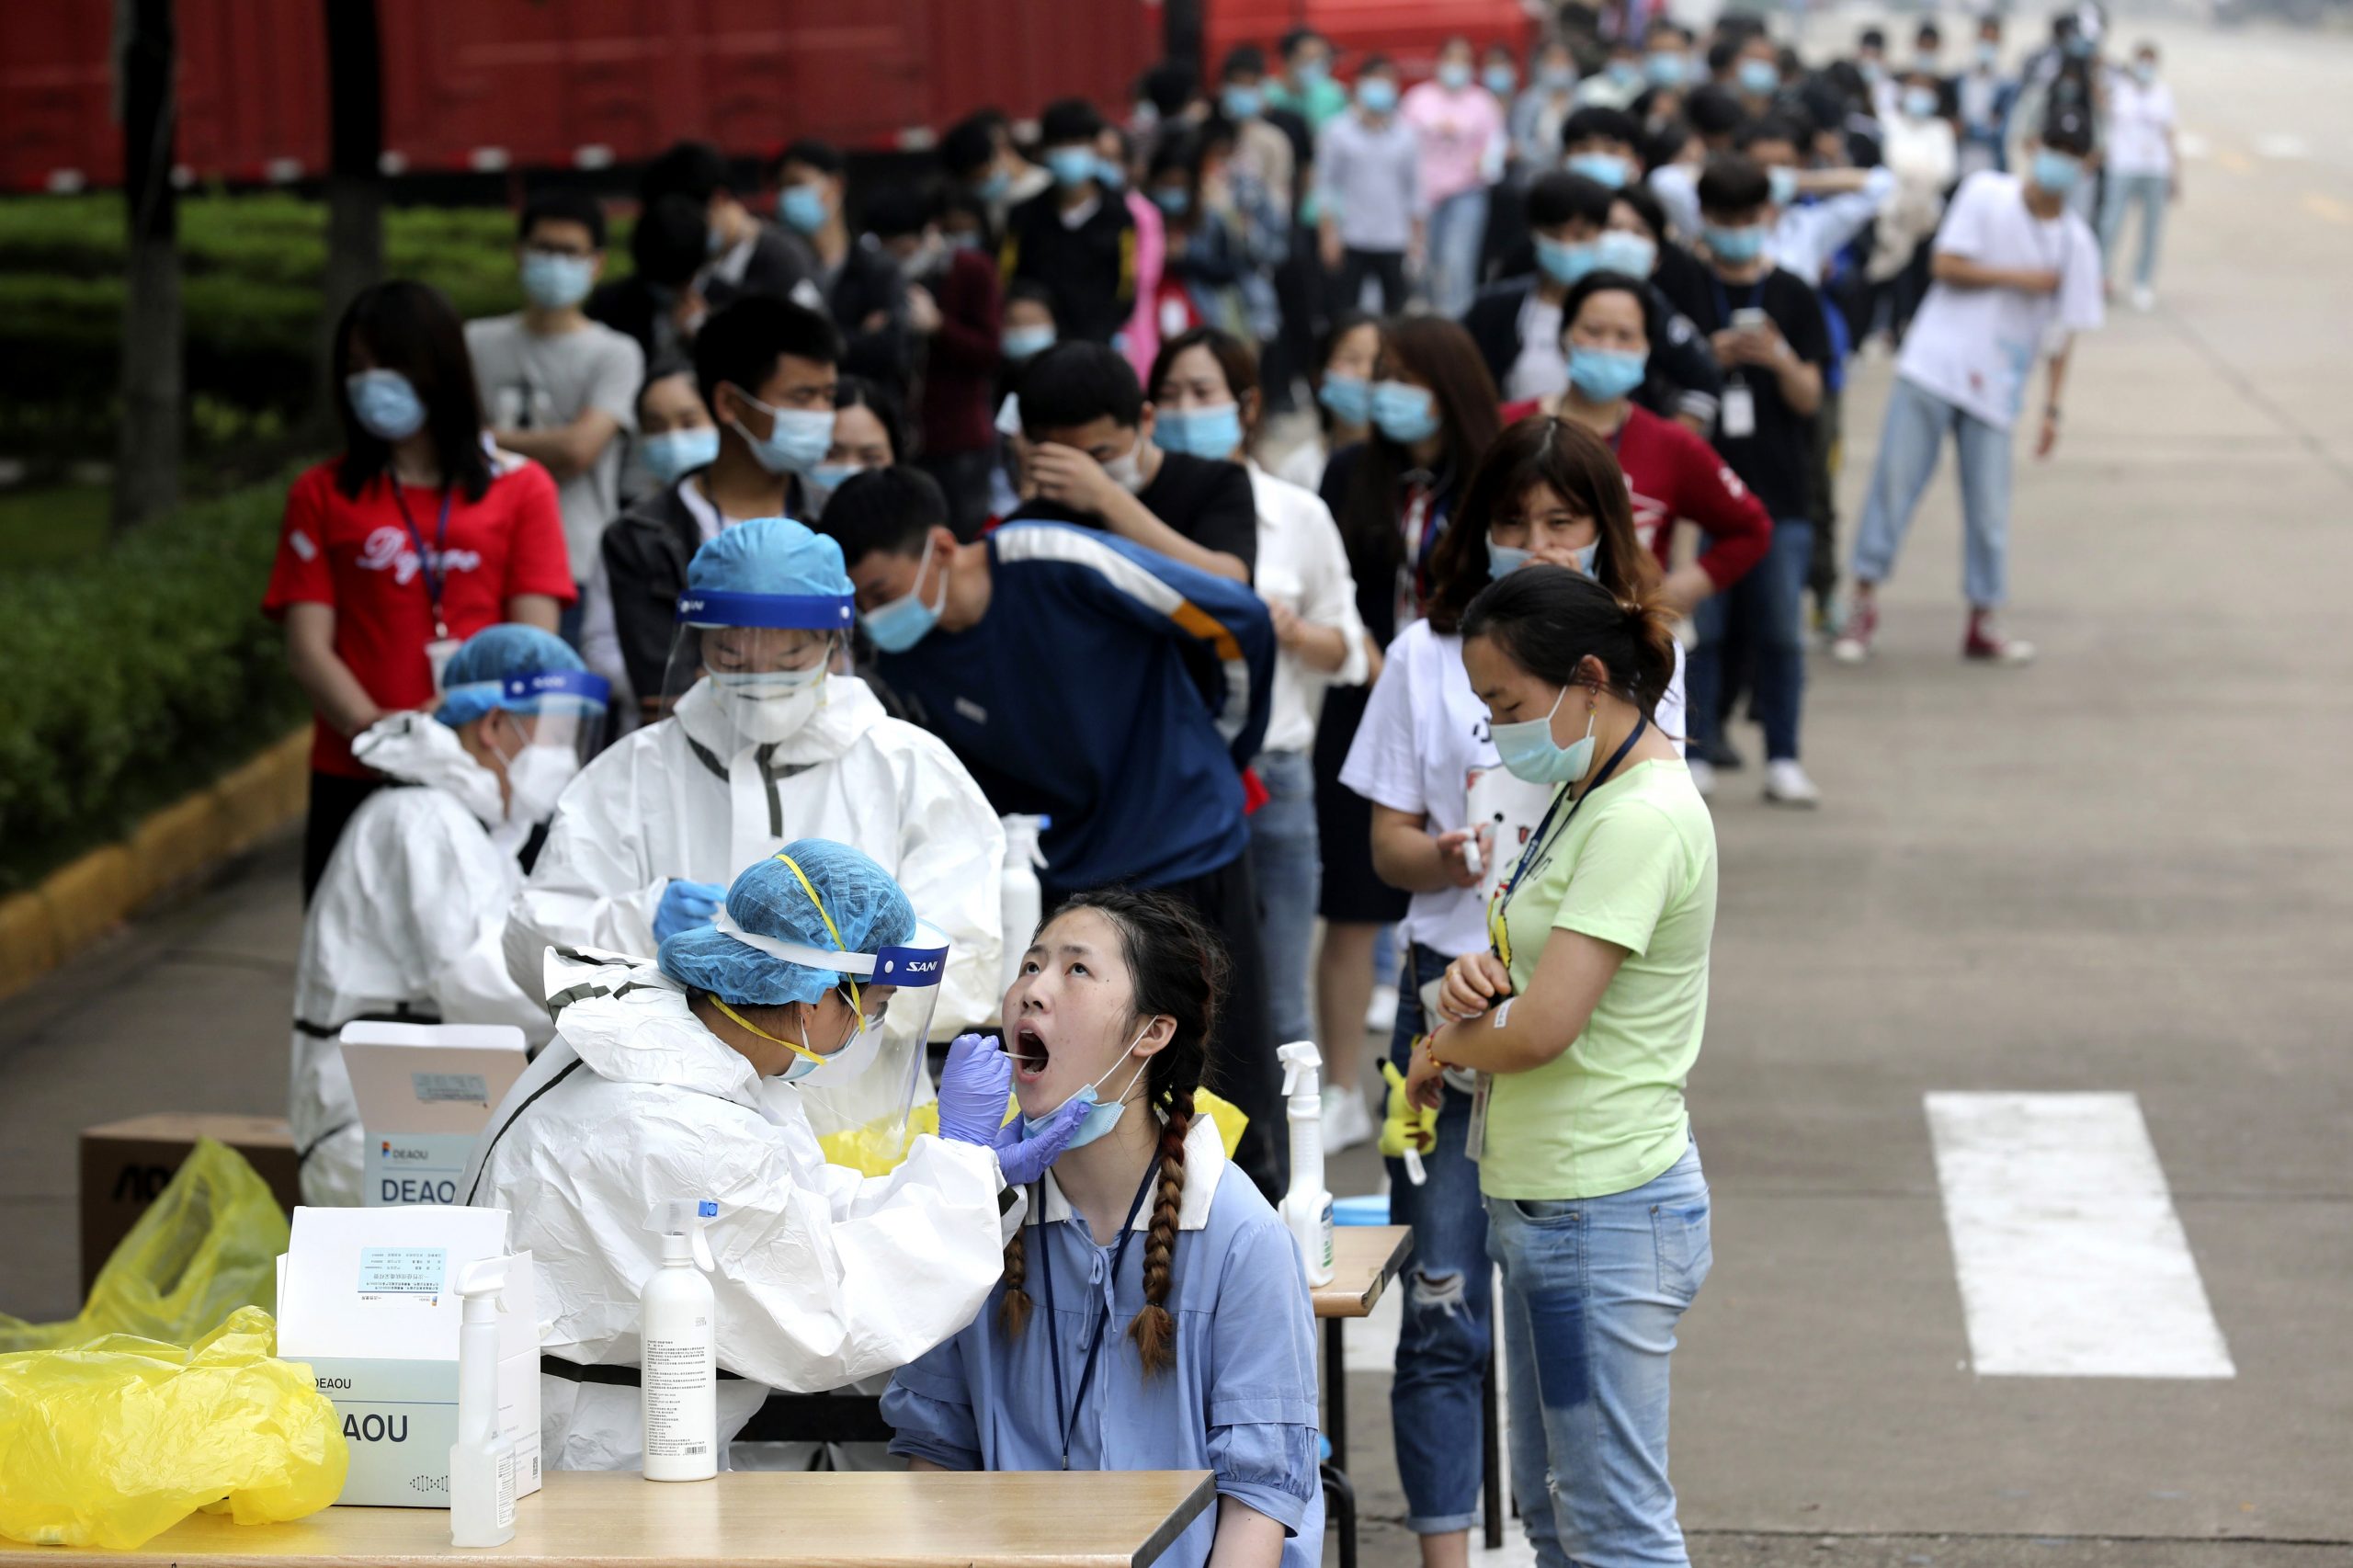 The Chinese CDC study found that the Coronavirus infection in Wuhan may be 10 times higher than reported